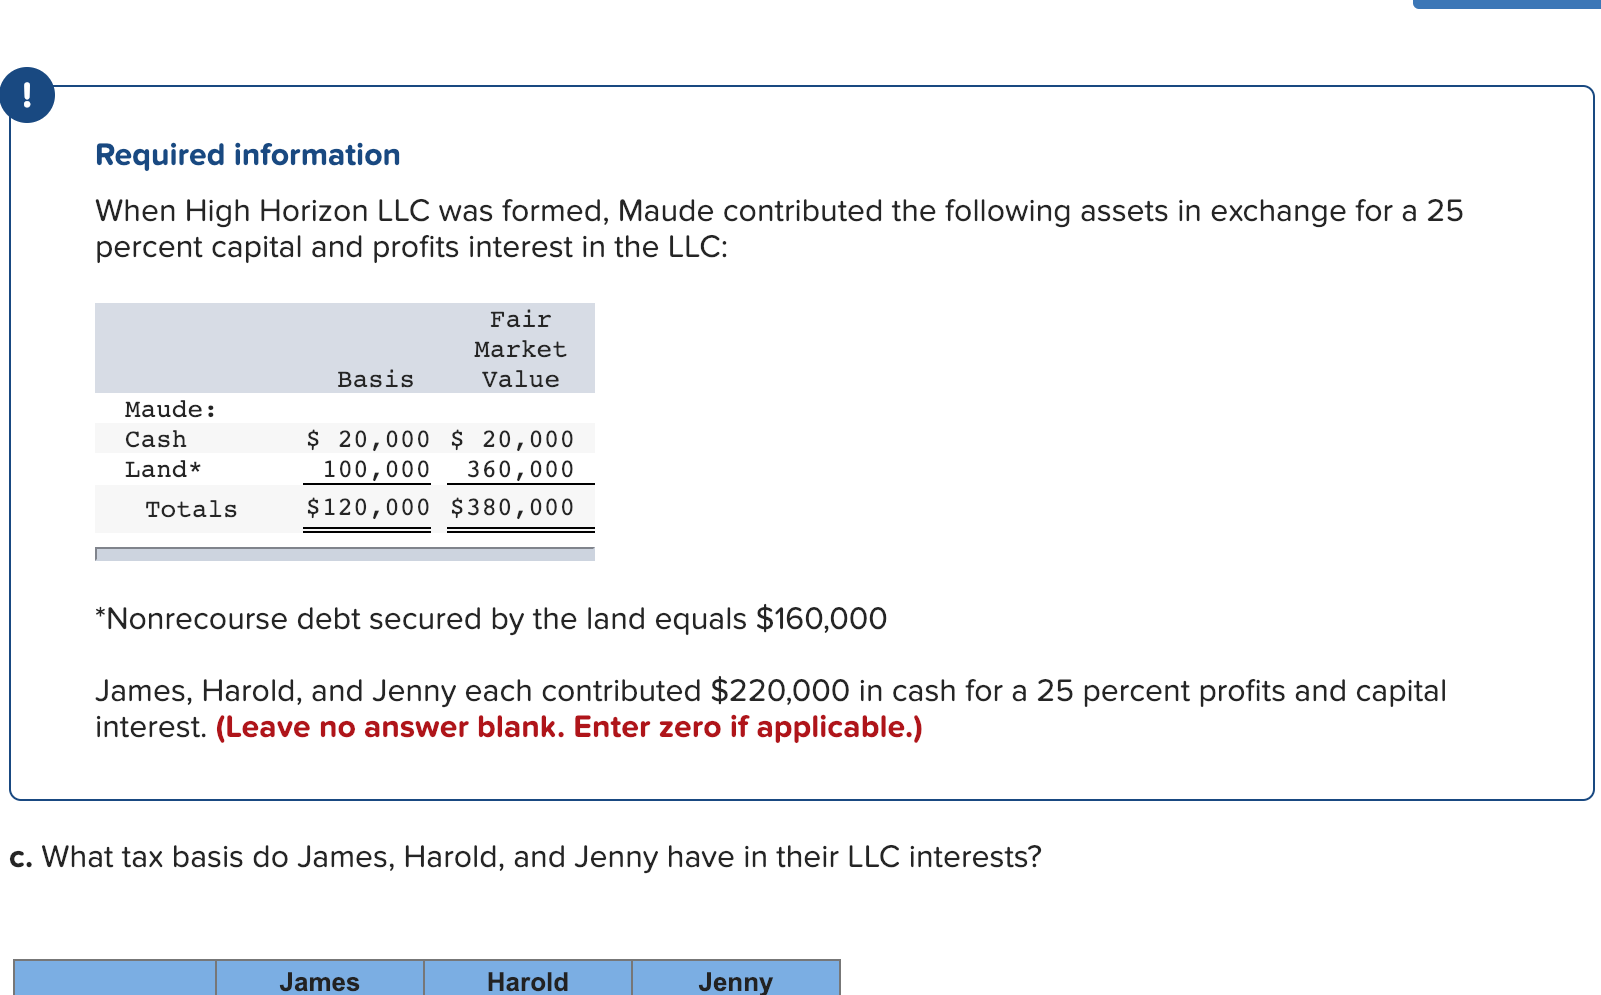 Required information
When High Horizon LLC was formed, Maude contributed the following assets in exchange for a 25
percent capital and profits interest in the LLC:
Fair
Market
Value
Basis
Maude:
Cash
Land*
$ 20,000 20,000
100,000 360,000
$120,000 $380,000
Totals
Nonrecourse debt secured by the land equals $160,000
James, Harold, and Jenny each contributed $220,000 in cash for a 25 percent profits and capital
interest. (Leave no answer blank. Enter zero if applicable.)
c. What tax basis do James, Harold, and Jenny have in their LLC interests?
James
Harold
Jenny
